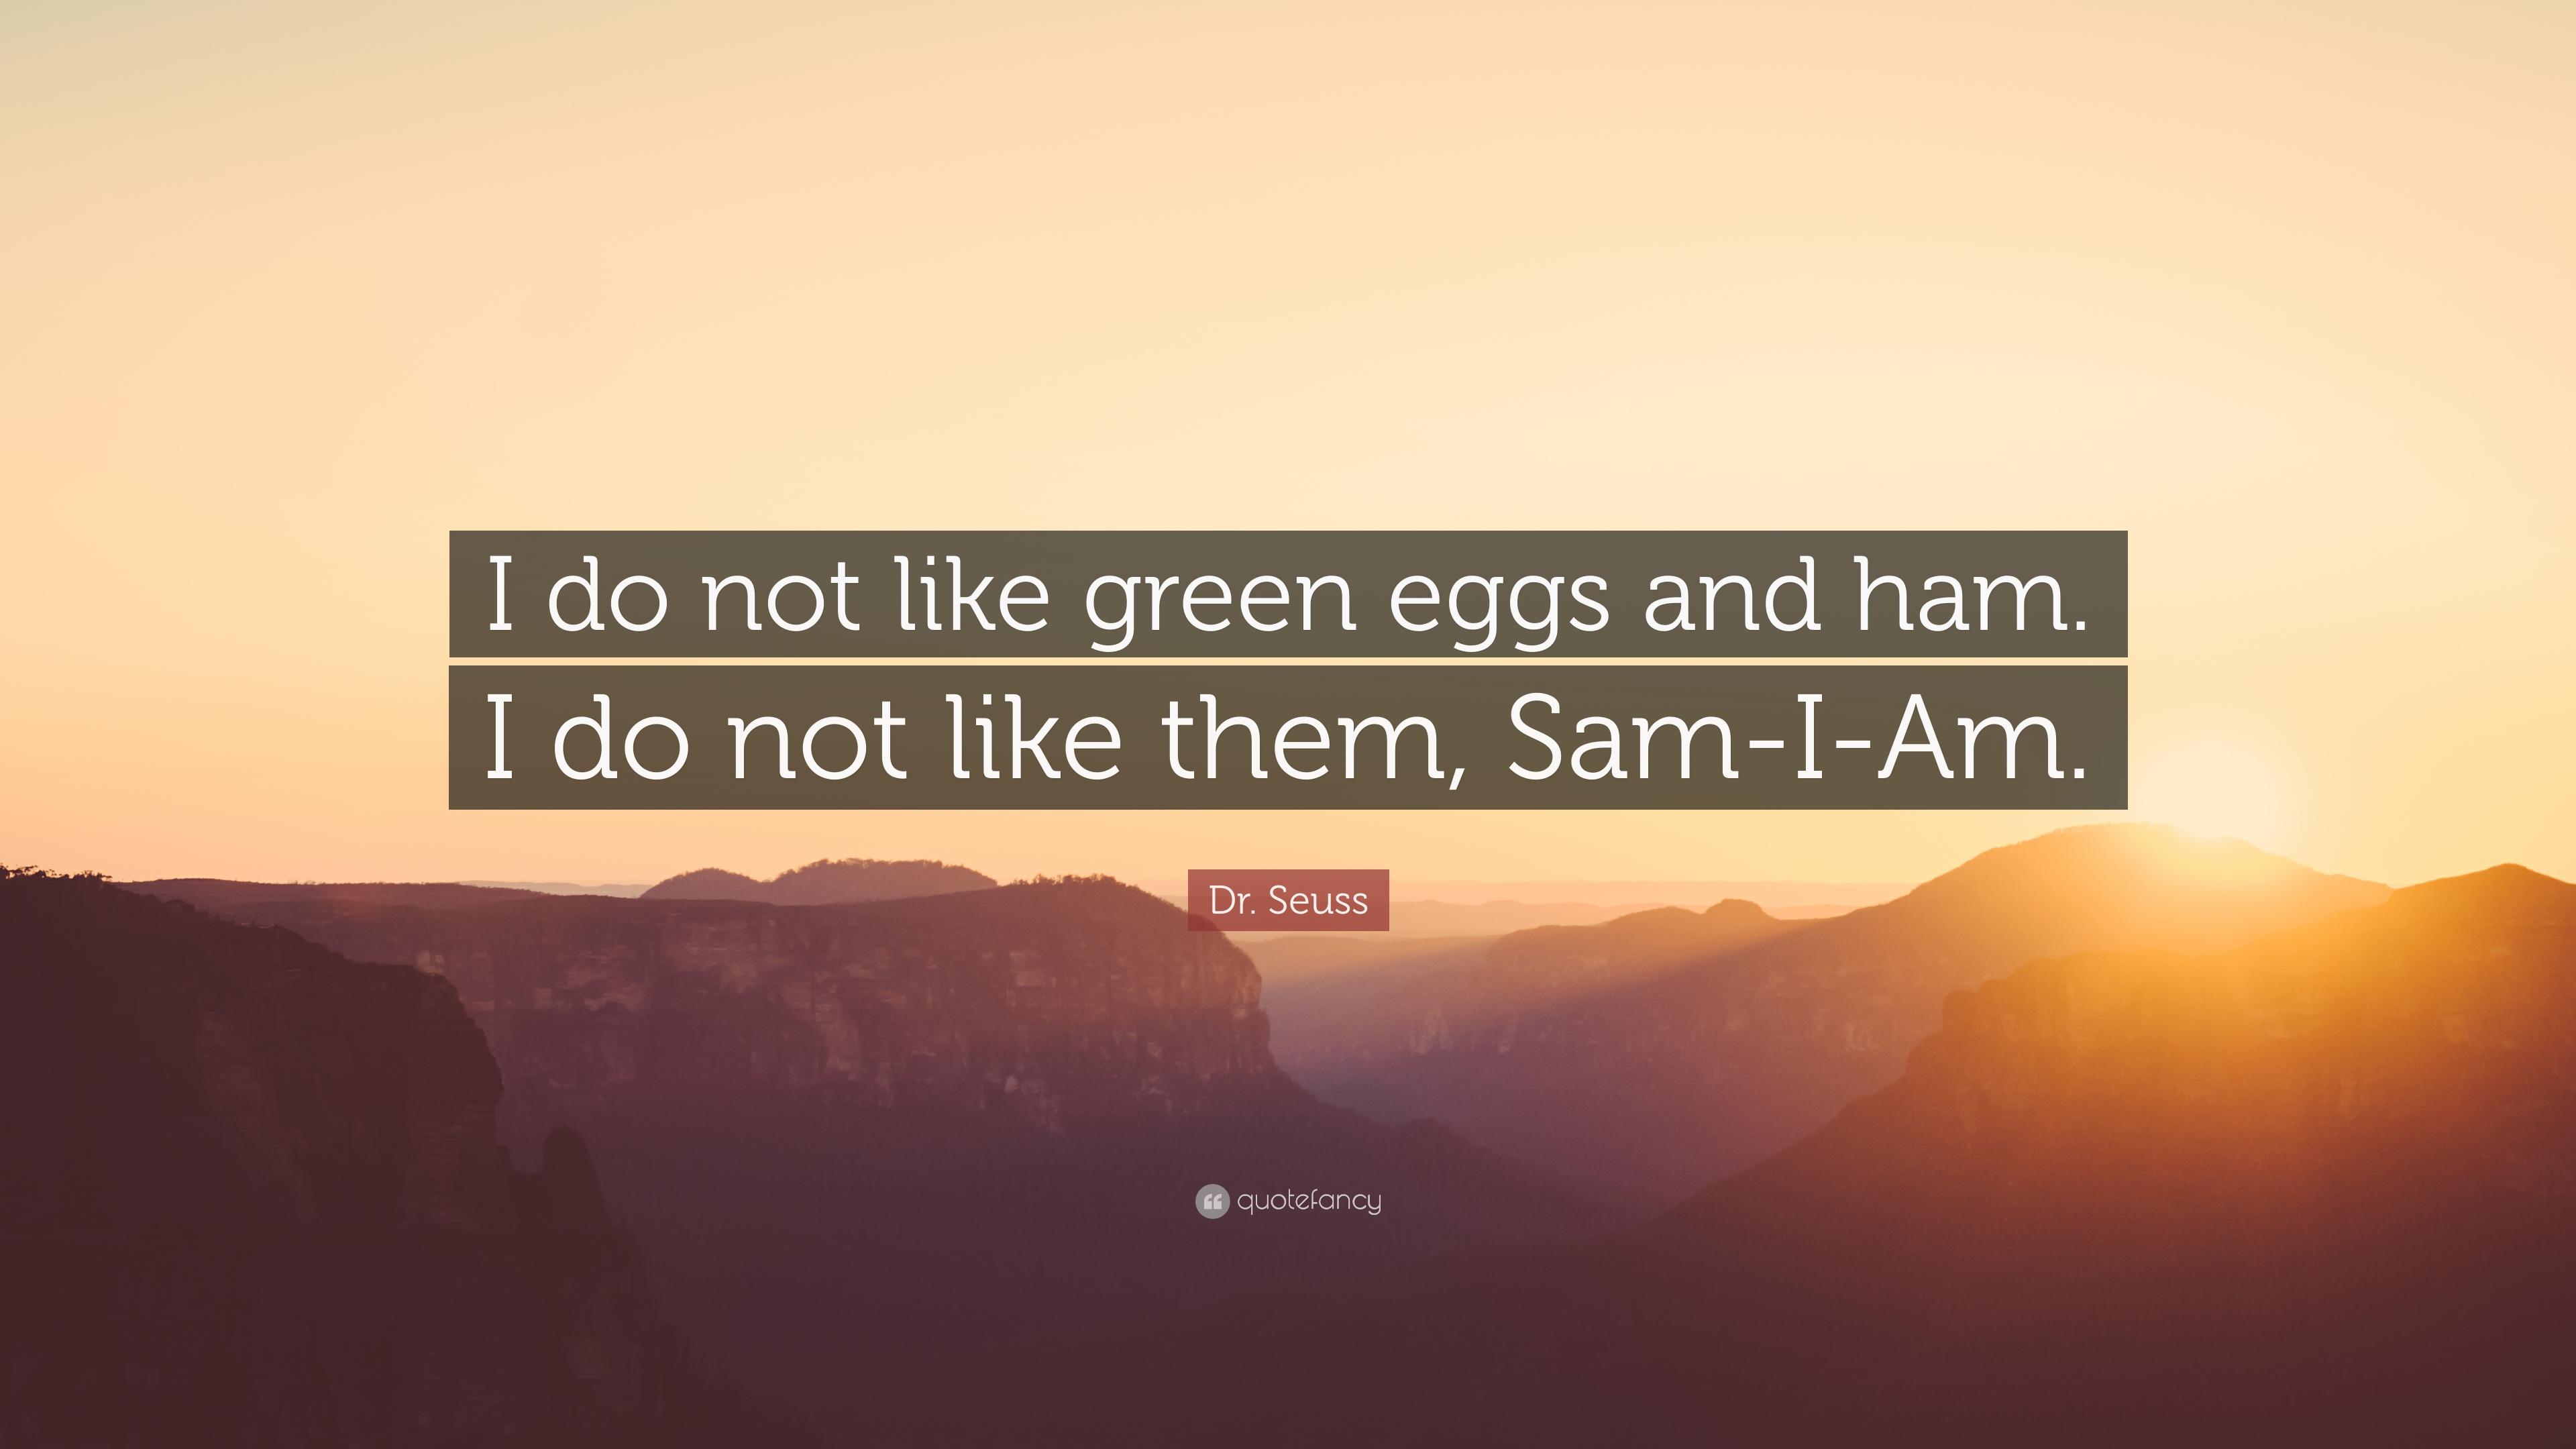 Dr. Seuss Quote: "I do not like green eggs and ham. 